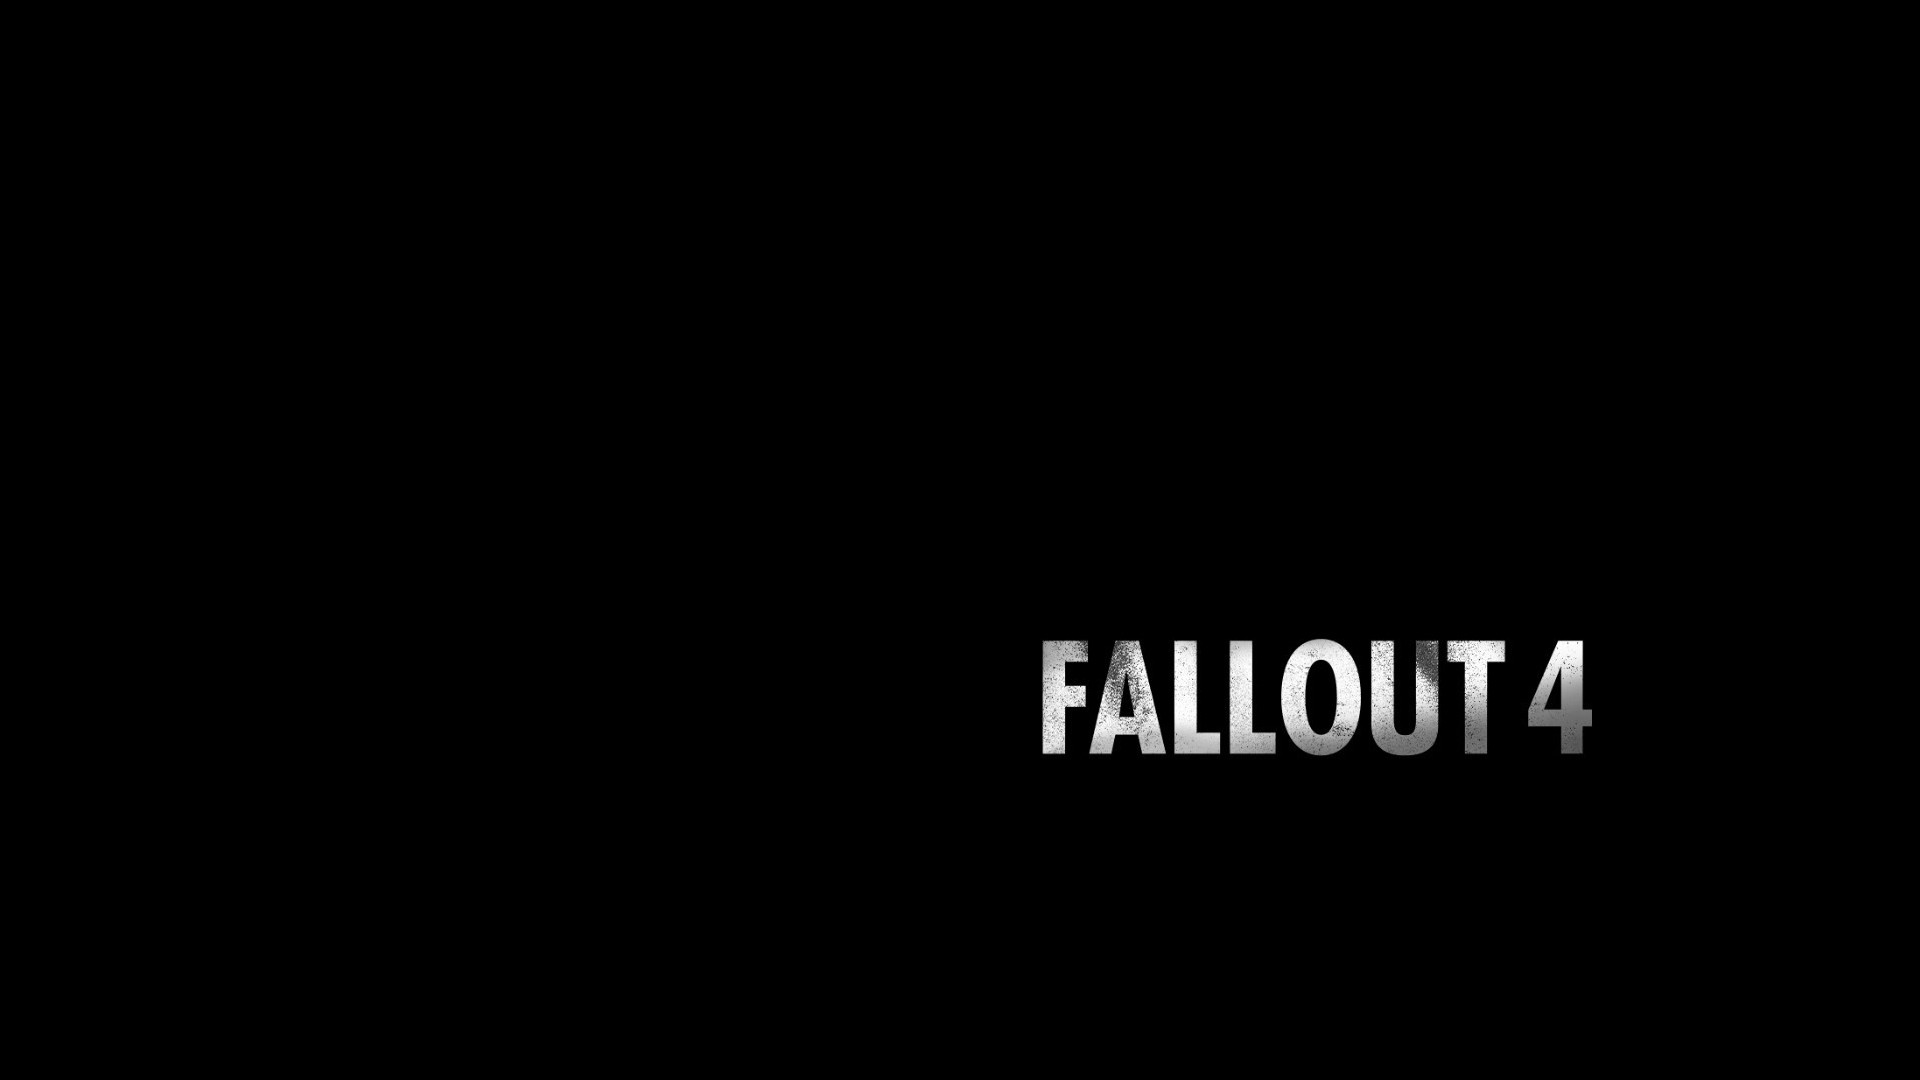 General 1920x1080 Fallout 4 video games simple background monochrome PC gaming black background minimalism